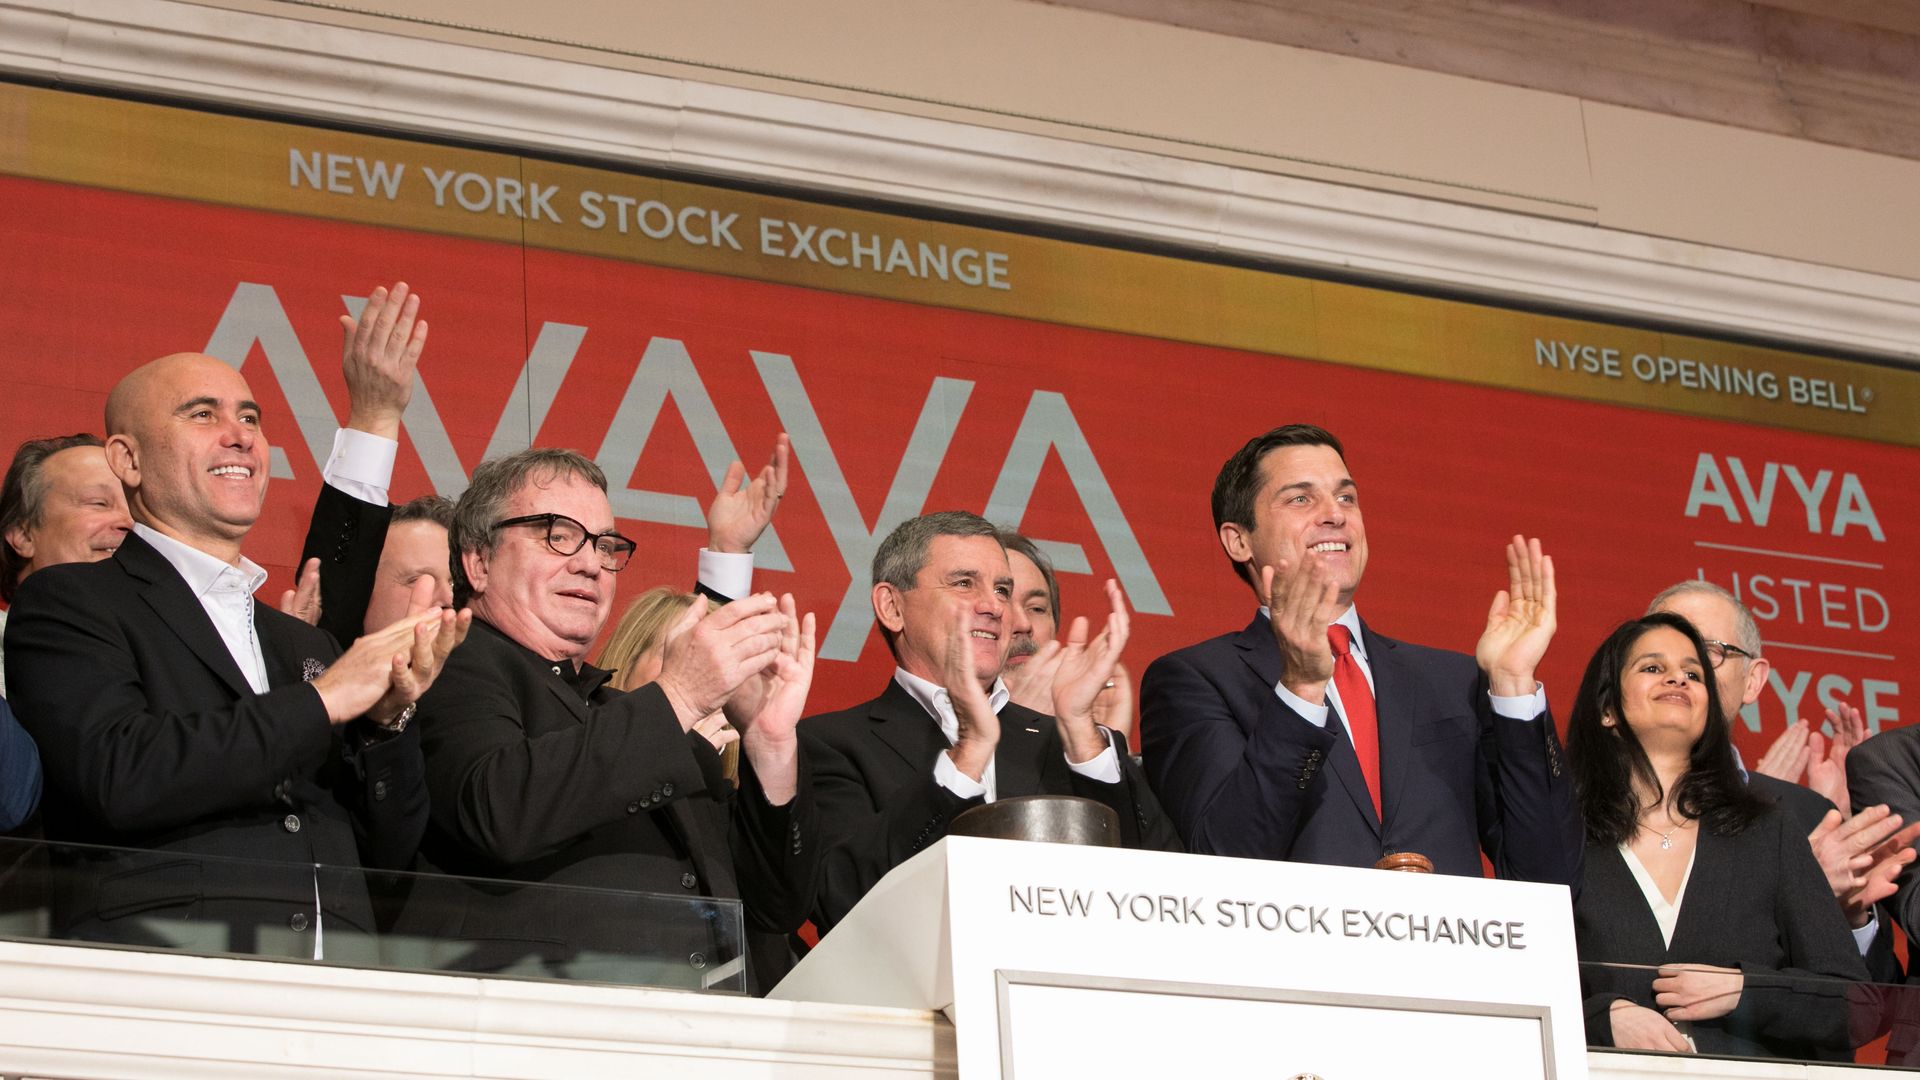 Avaya at the NYSE opening bell ceremony